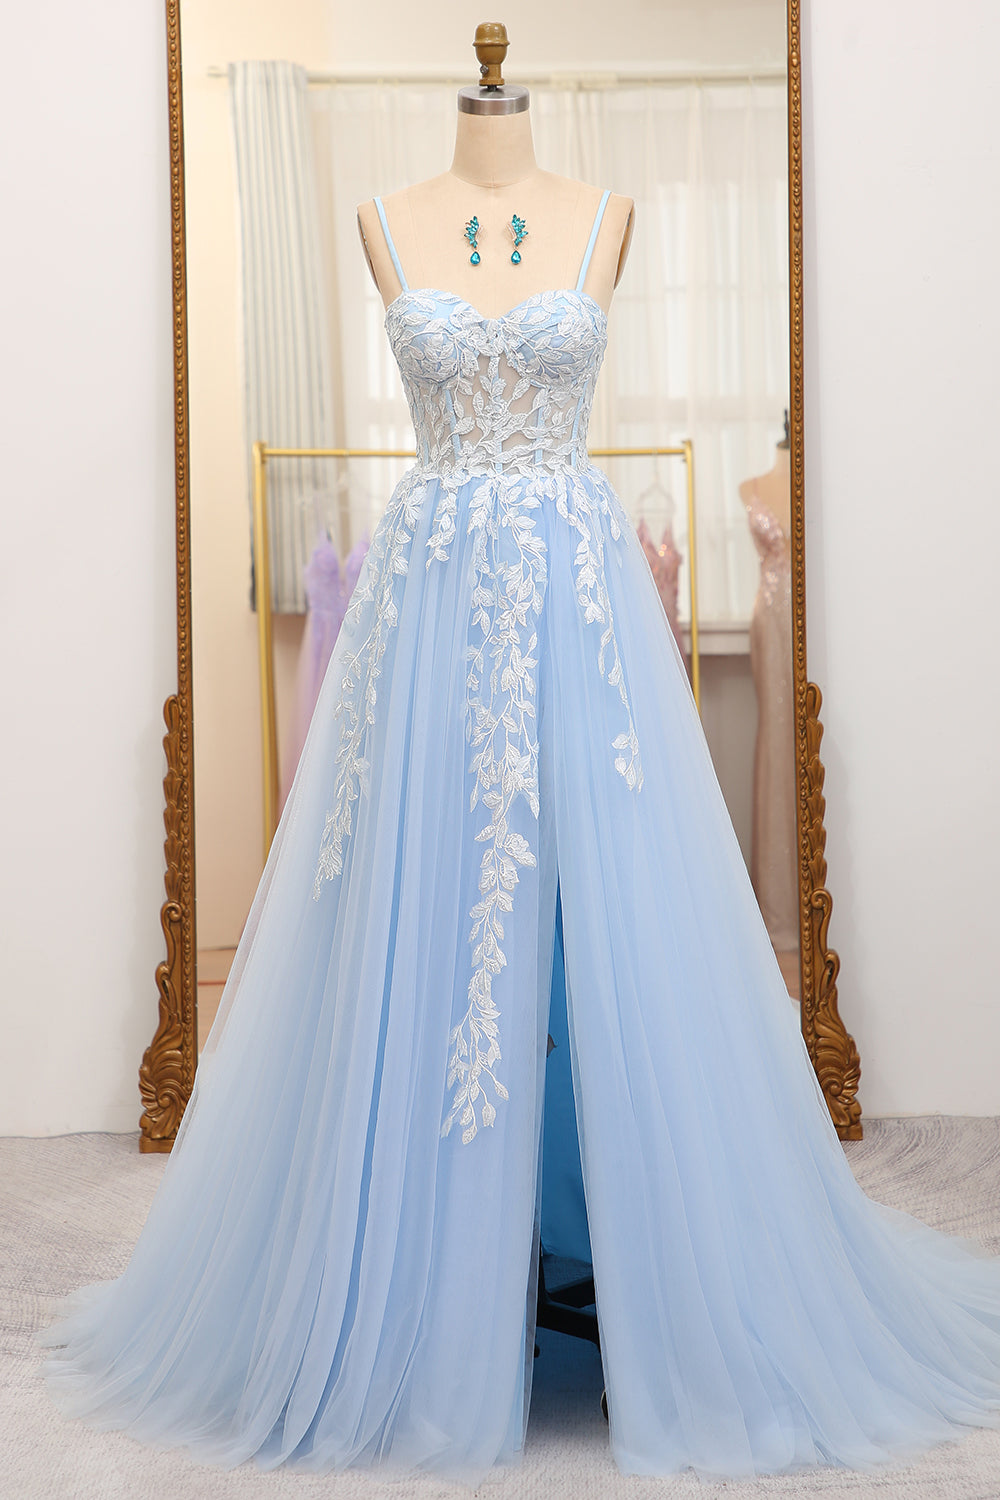 Sky Blue A Line Tulle Appliqued Long Corset Prom Dress With Front Slit